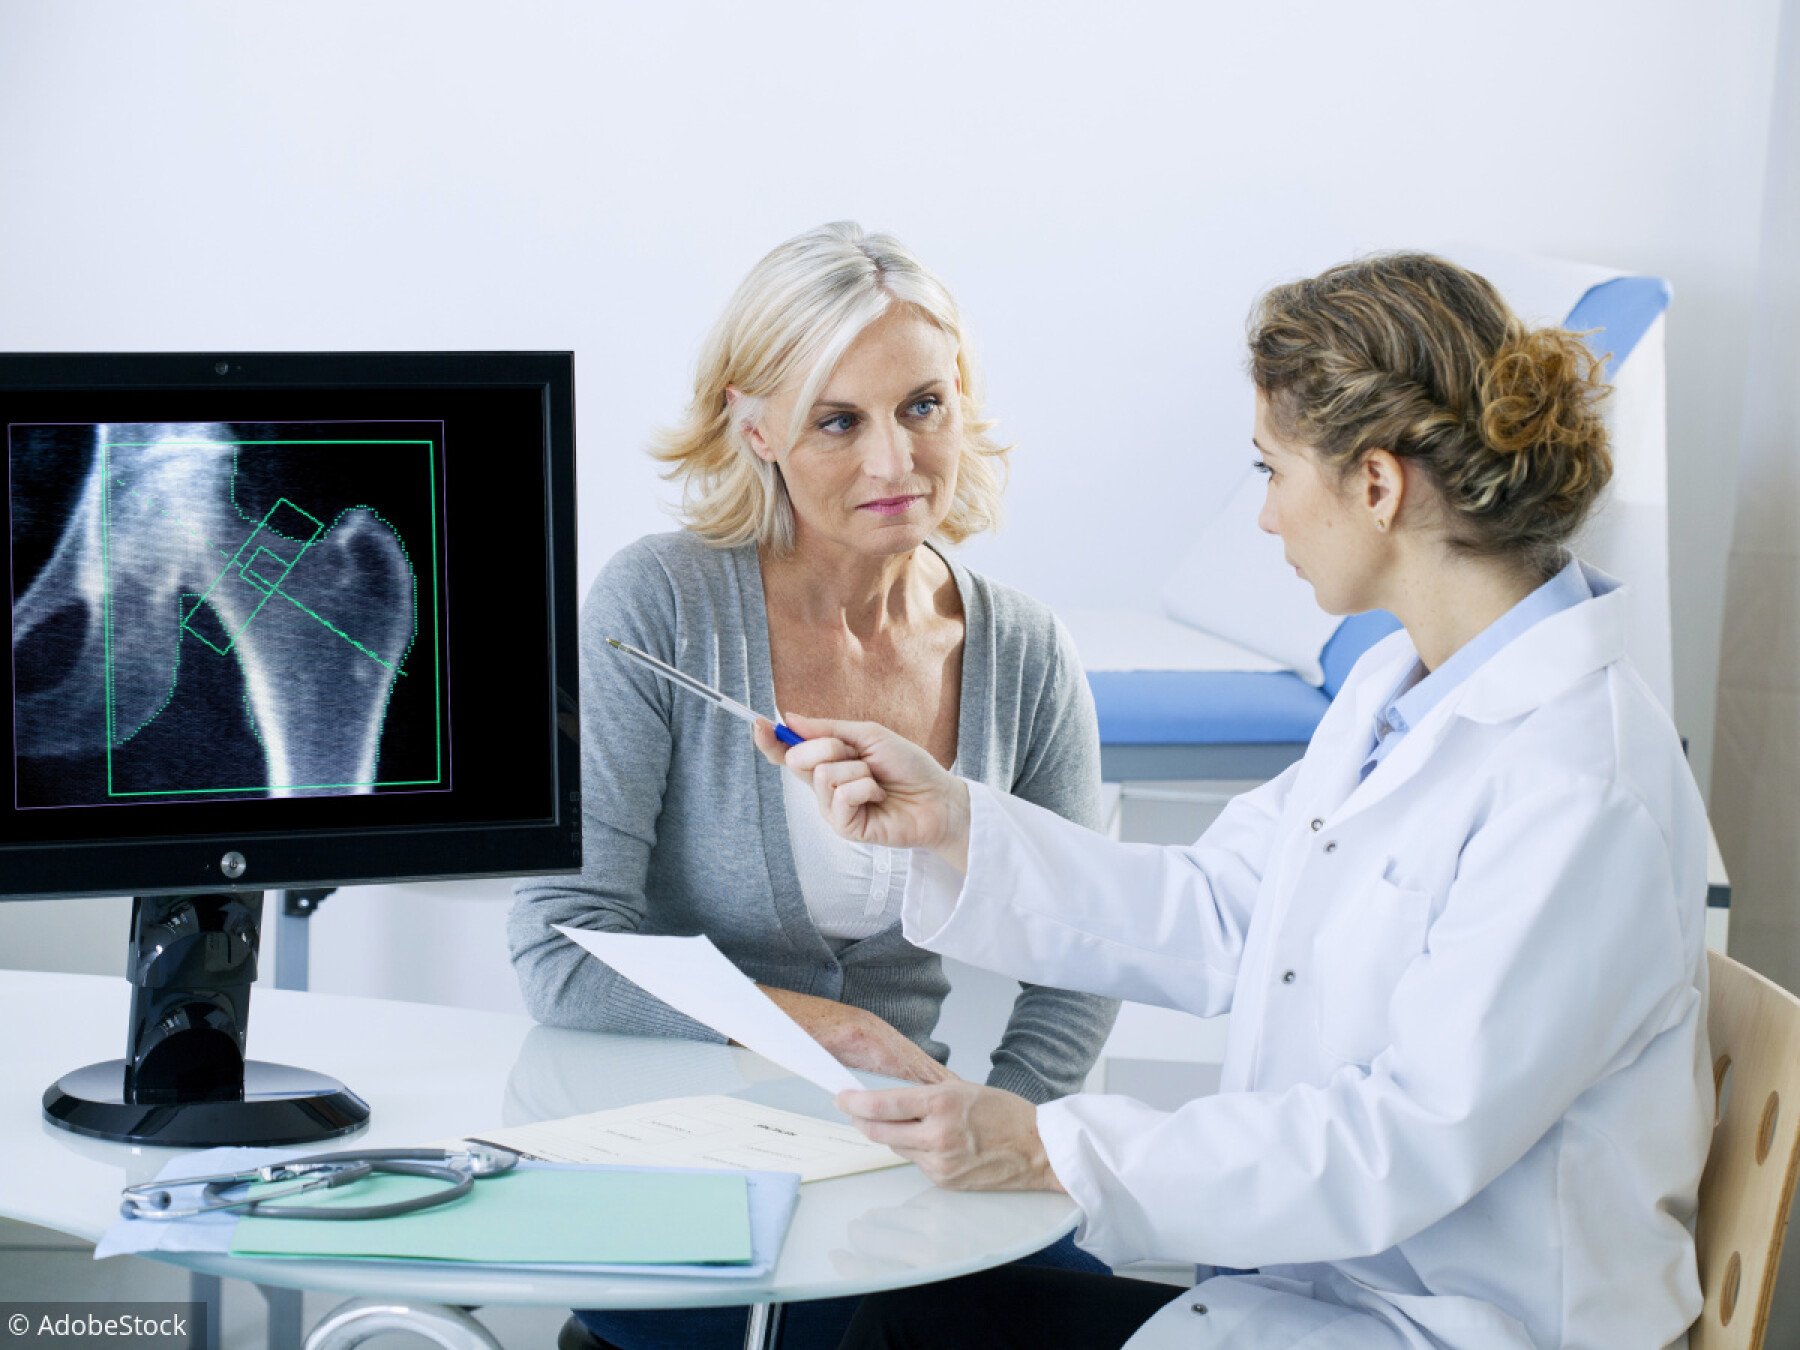   Digital X-ray   X-ray machines use electromagnetic radiation, passing these particles through the body to capture specialized images of harder bodily structures like bones.  Depending on what part of your body requires an X-ray, the specially train